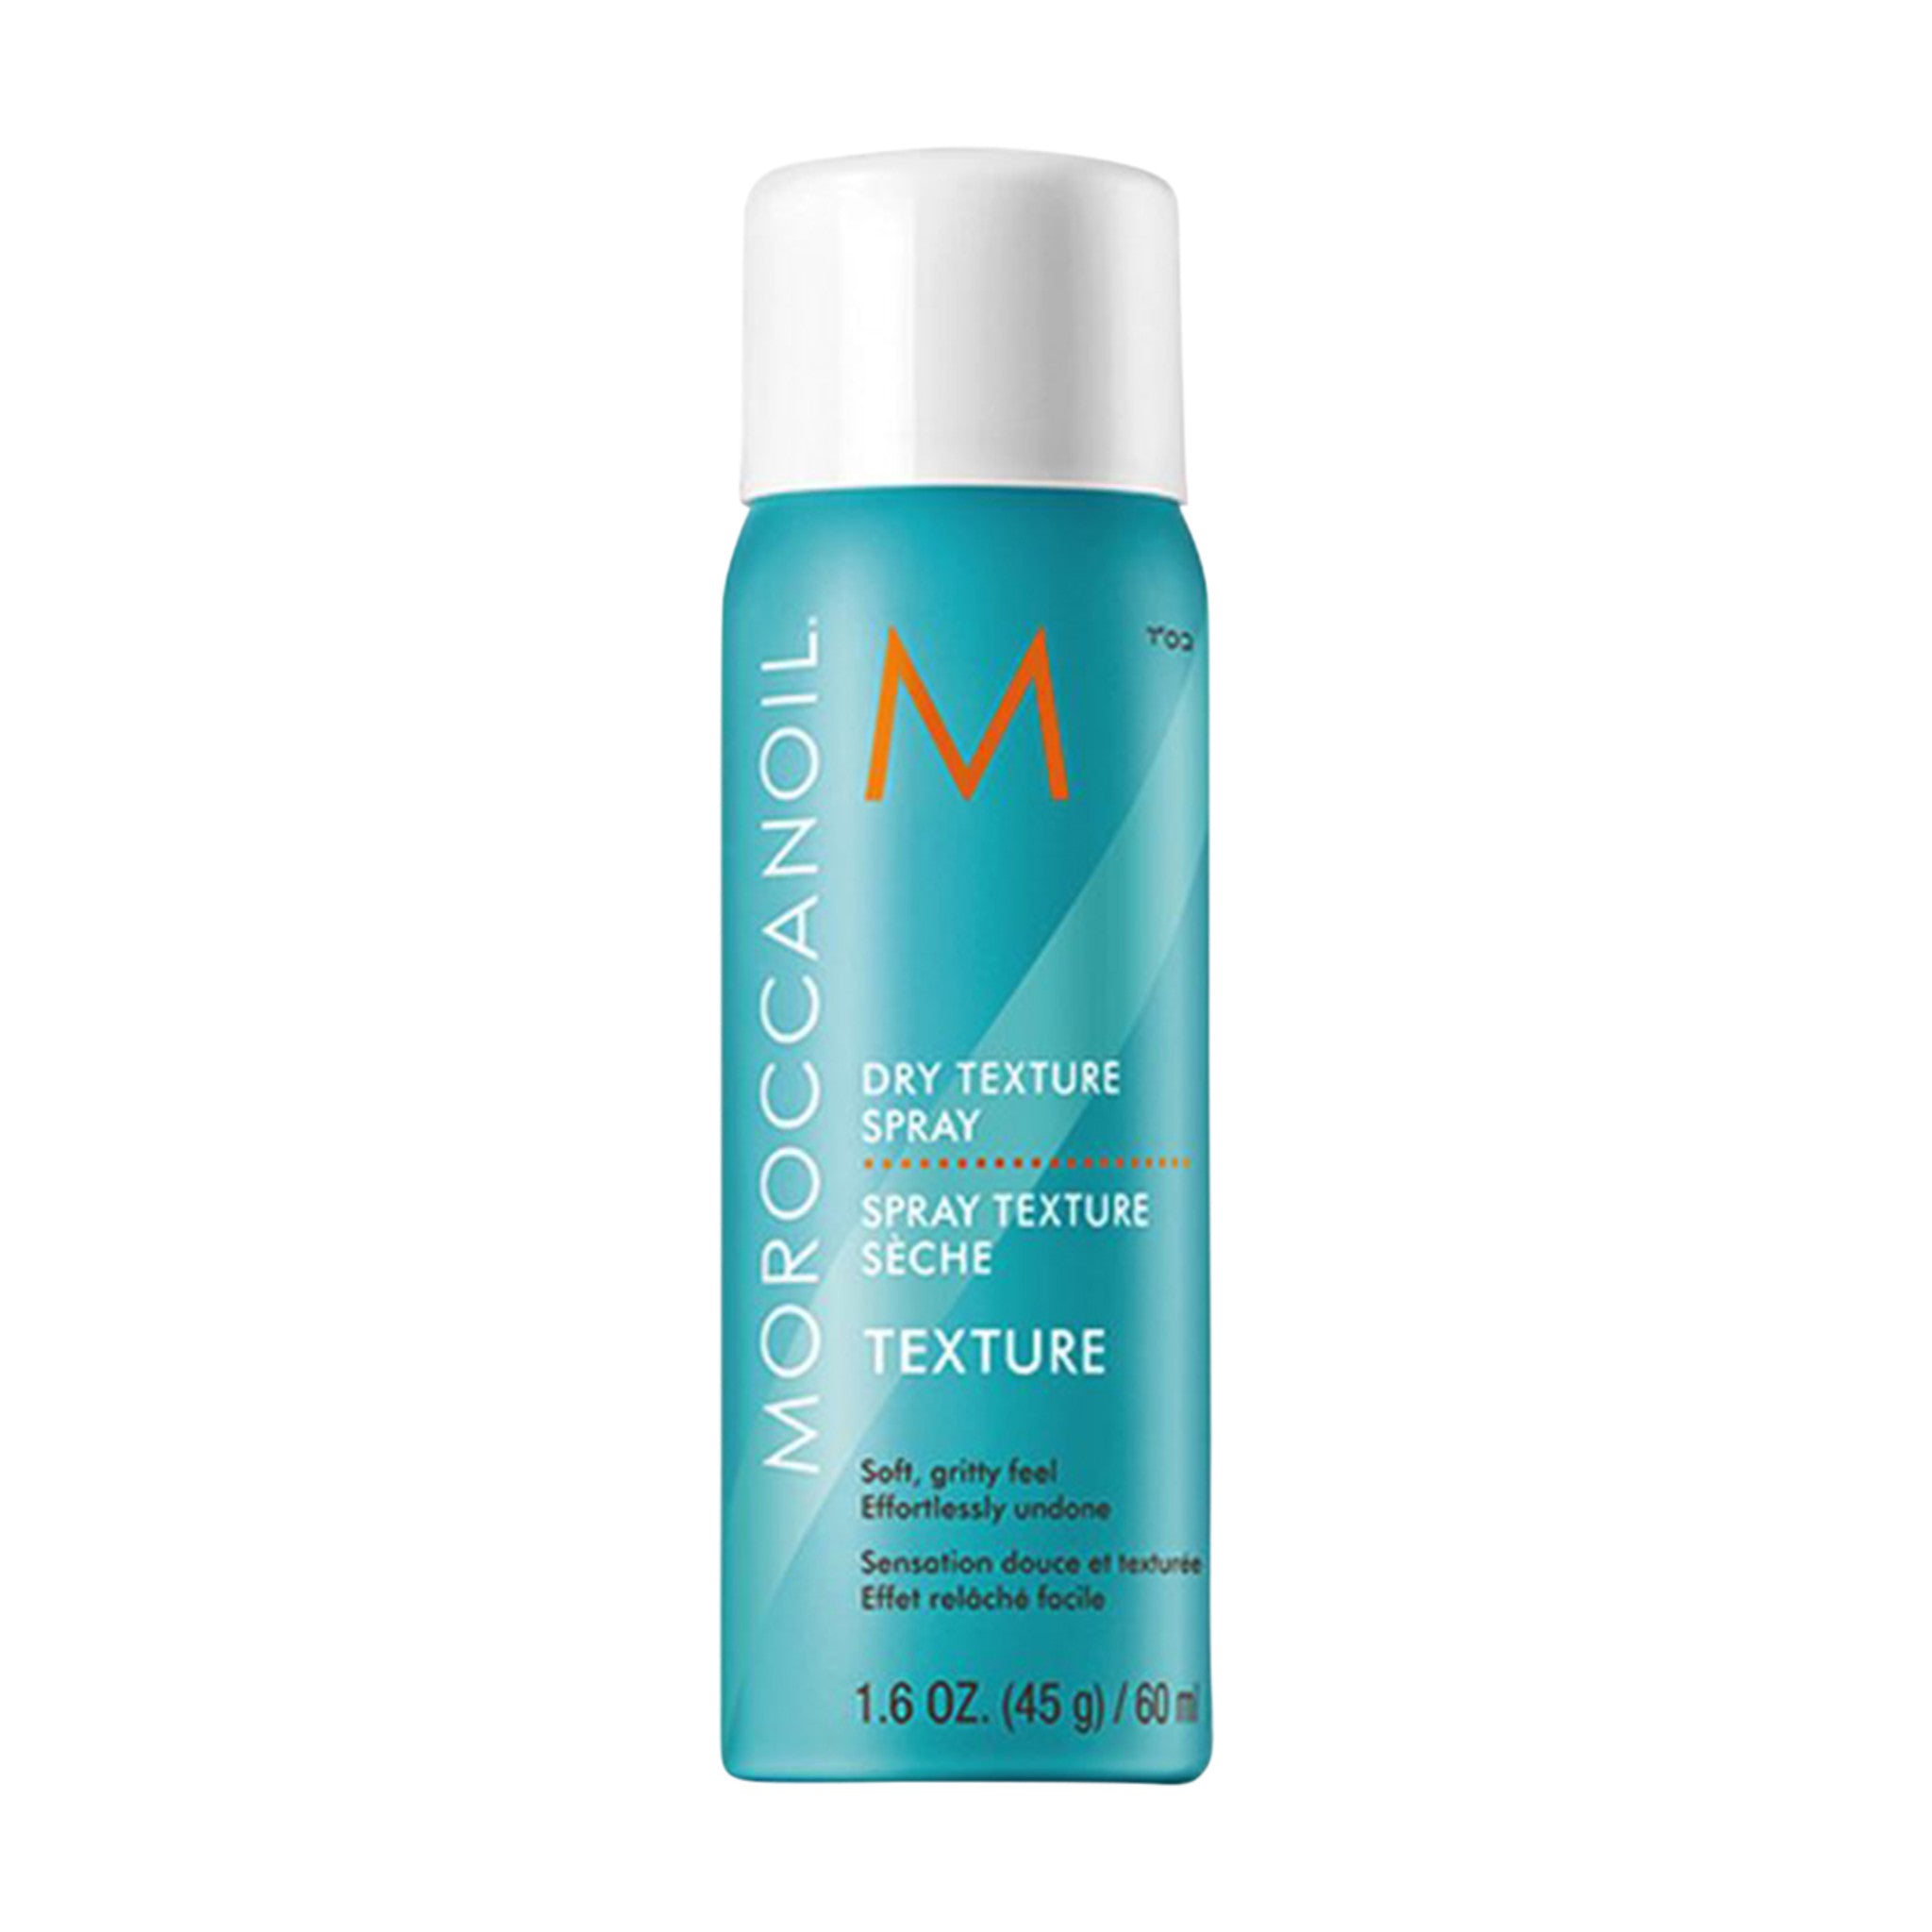 Moroccanoil Dry Texture Spray Size variant: Travel Size main image.